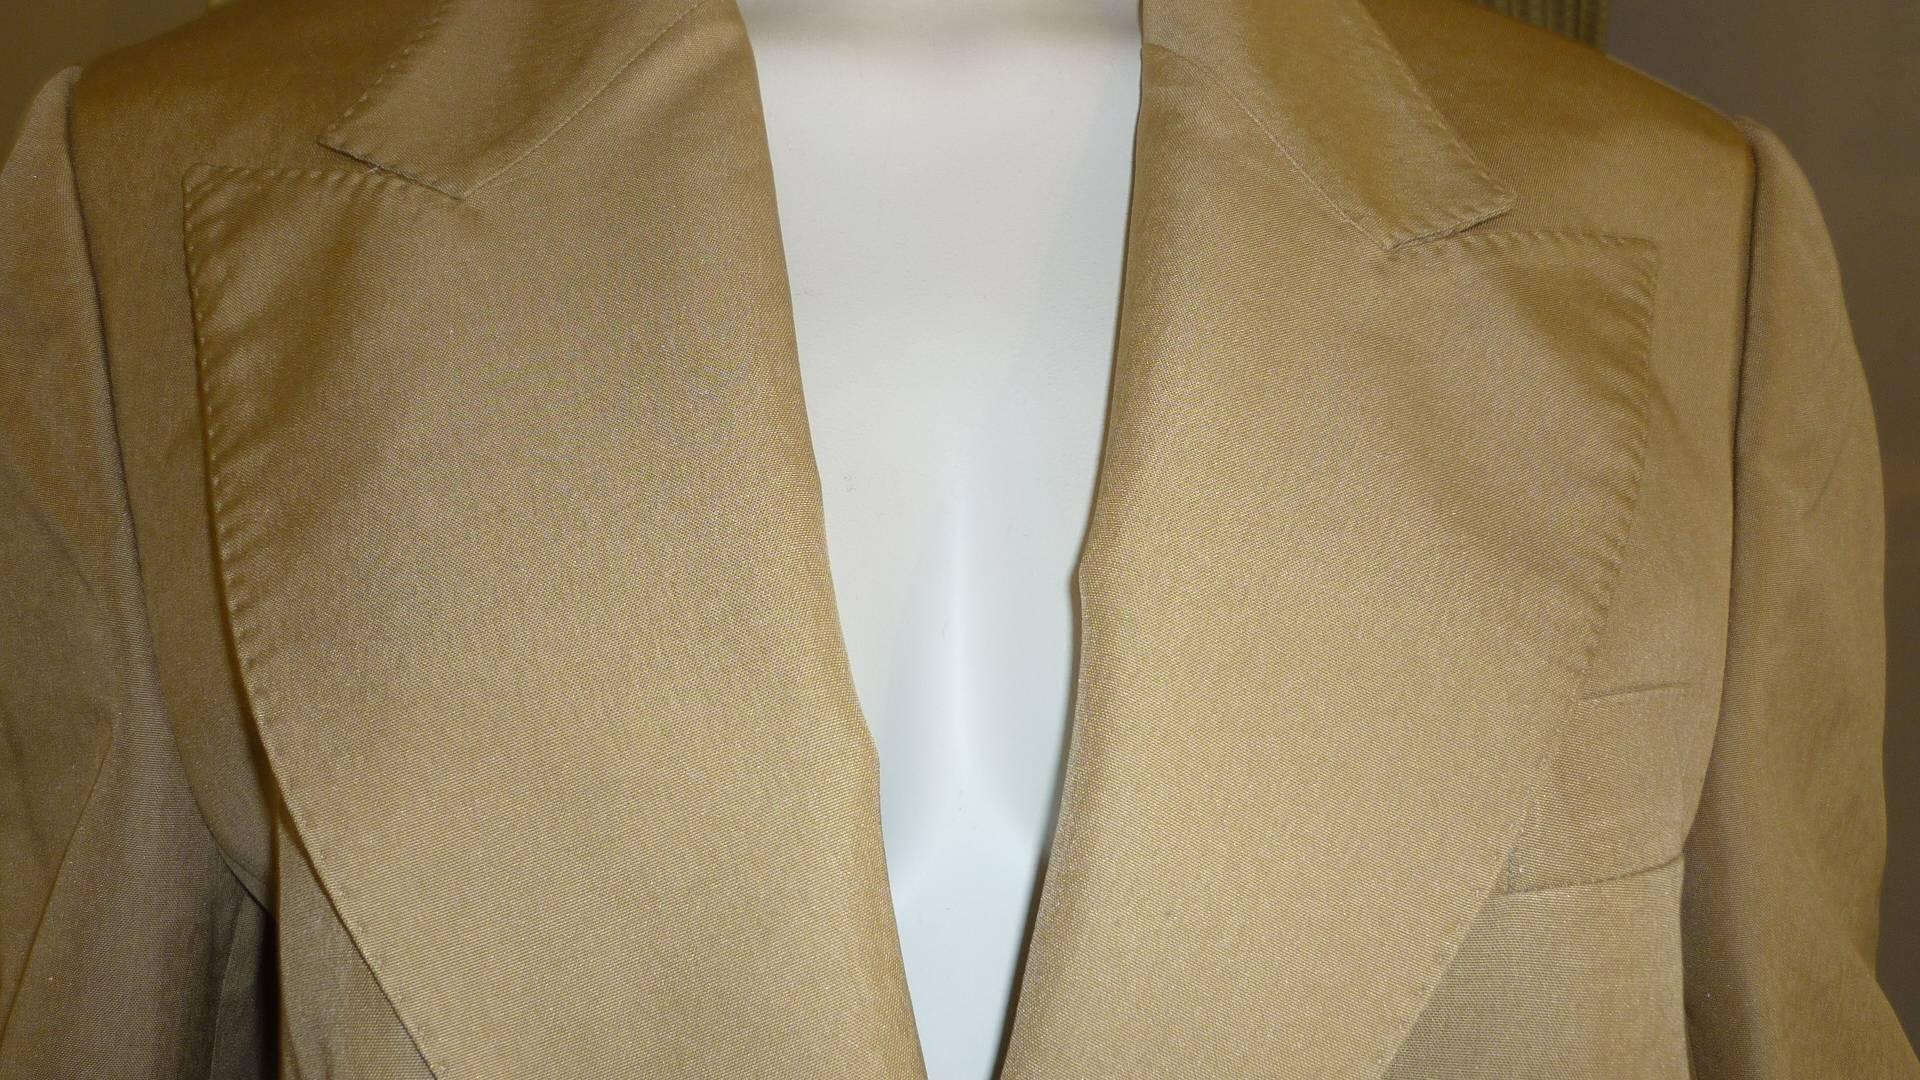 Beautifully tailored jacket designed by either Tom Ford or Alessandra Facchinetti.

This all silk jacket/blazer has oiping throughout two inside pockets as well as on slit breat pocket and two flap front pockets that have yet to be opened. 

The